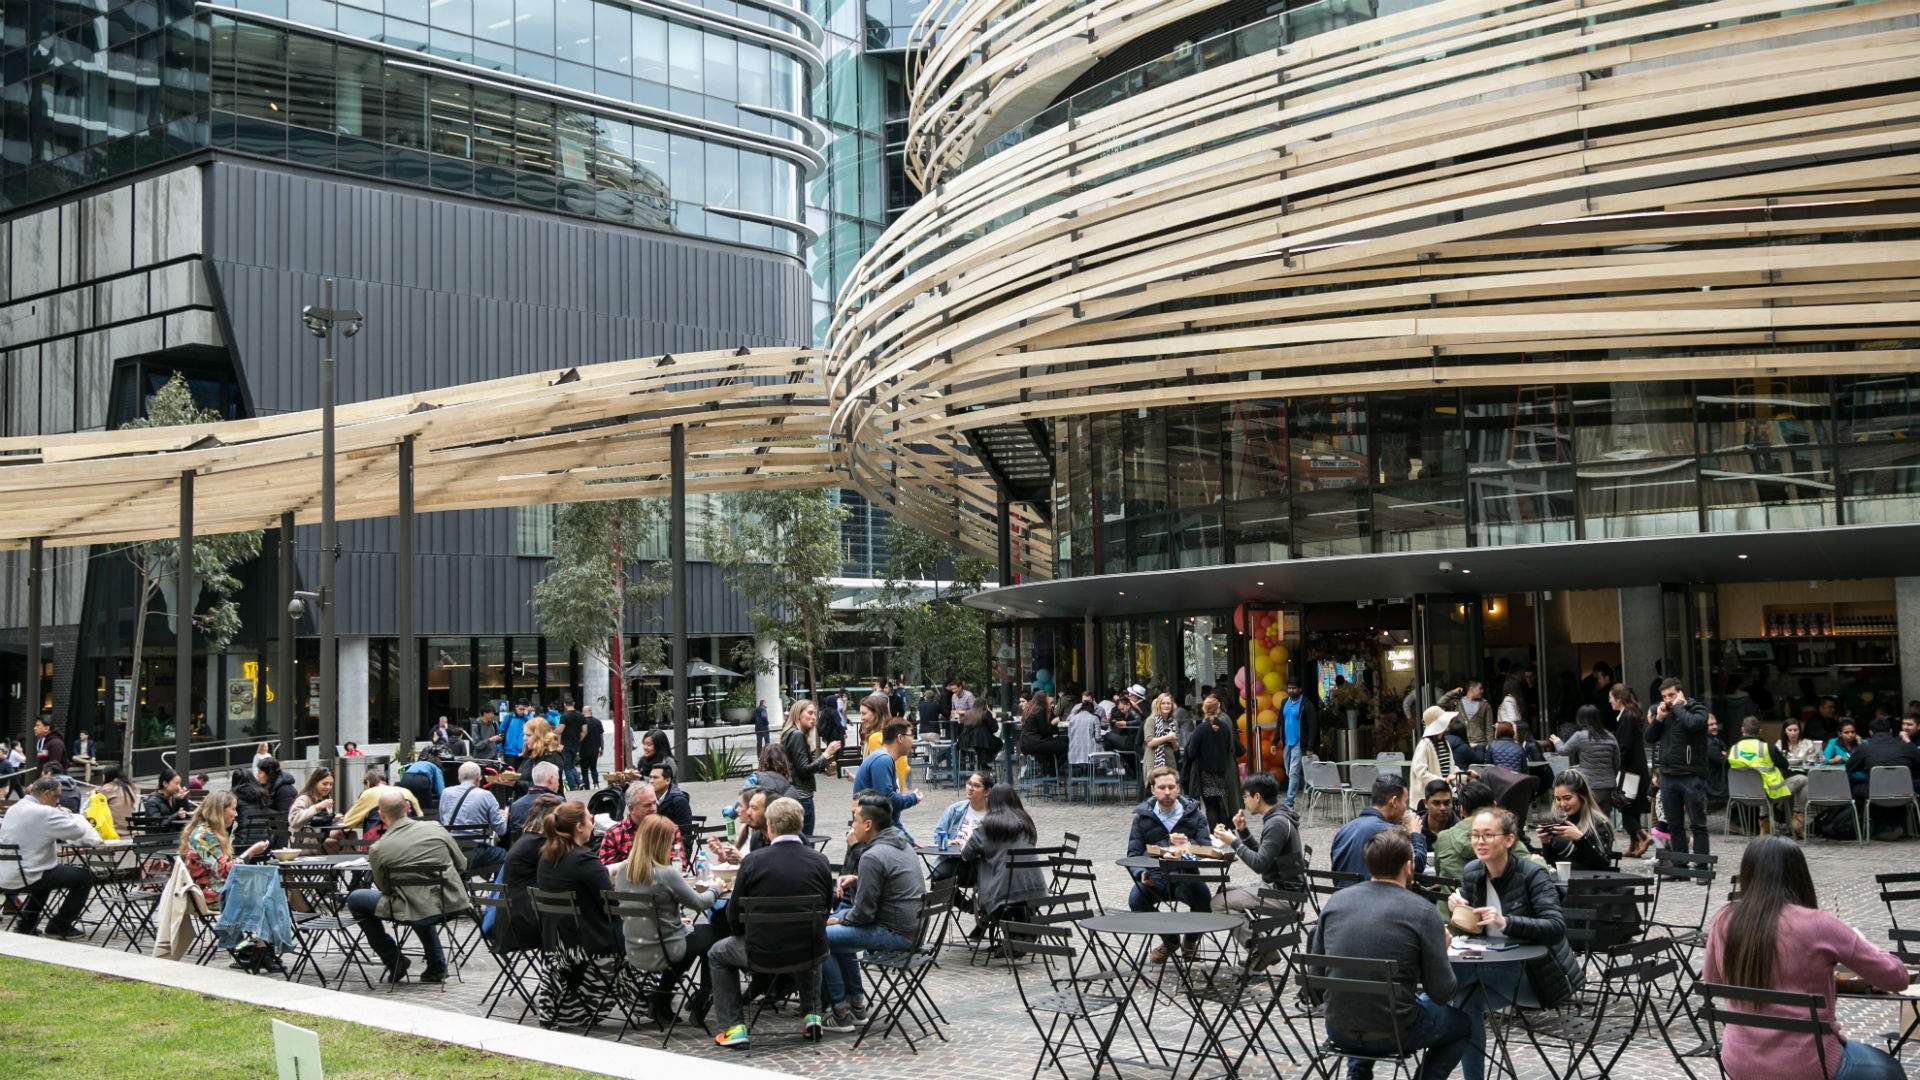 These Nine Soon-to-Open Restaurants and Shops Will Complete Sydney's Massive Darling Square Precinct